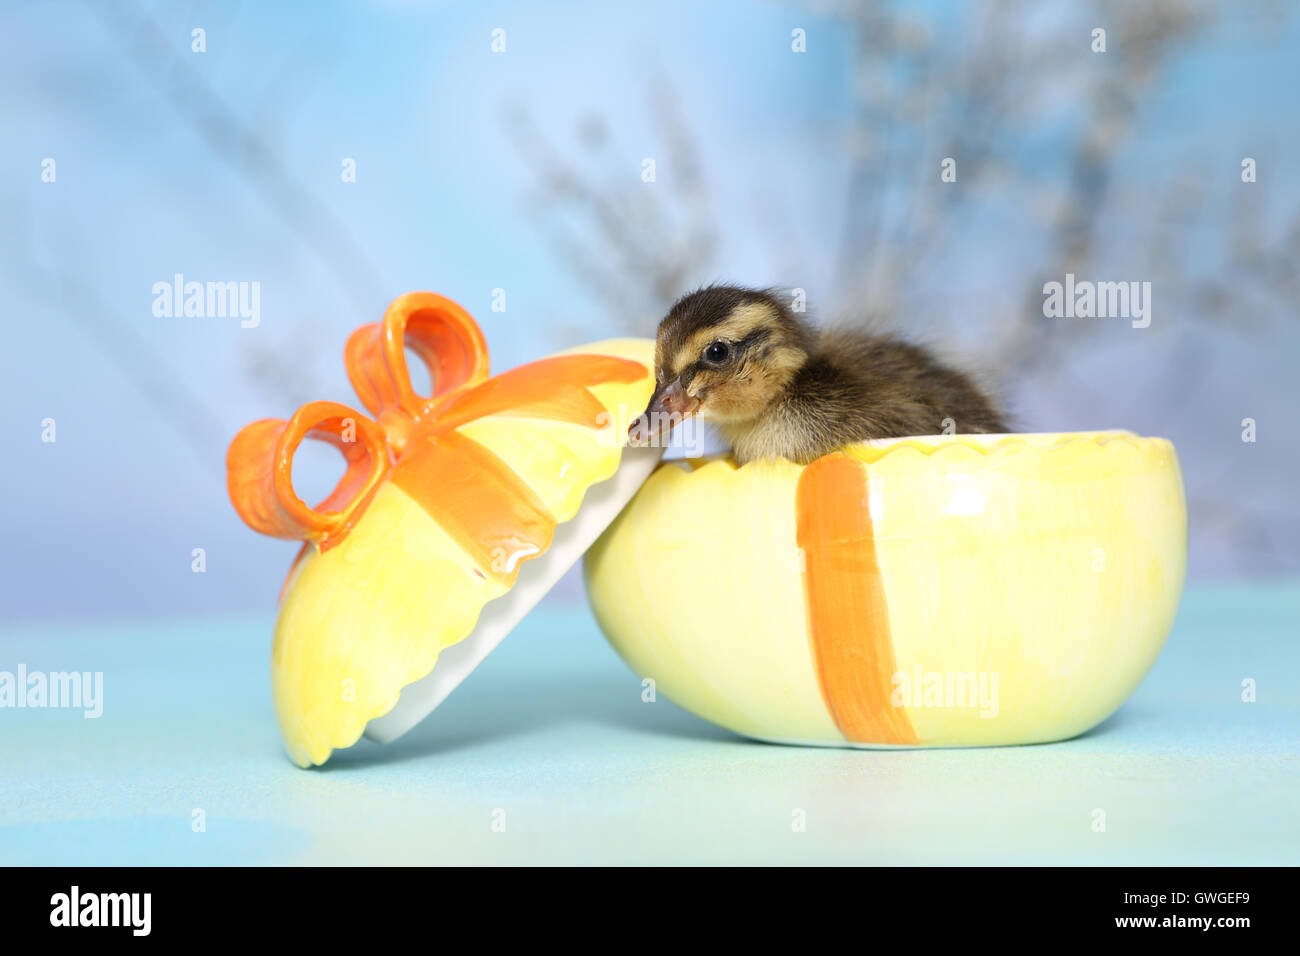 Indian Runner Duck. Duckling in an Easter egg, made from porcelaine. Studio picture against a blue background. Germany Stock Photo